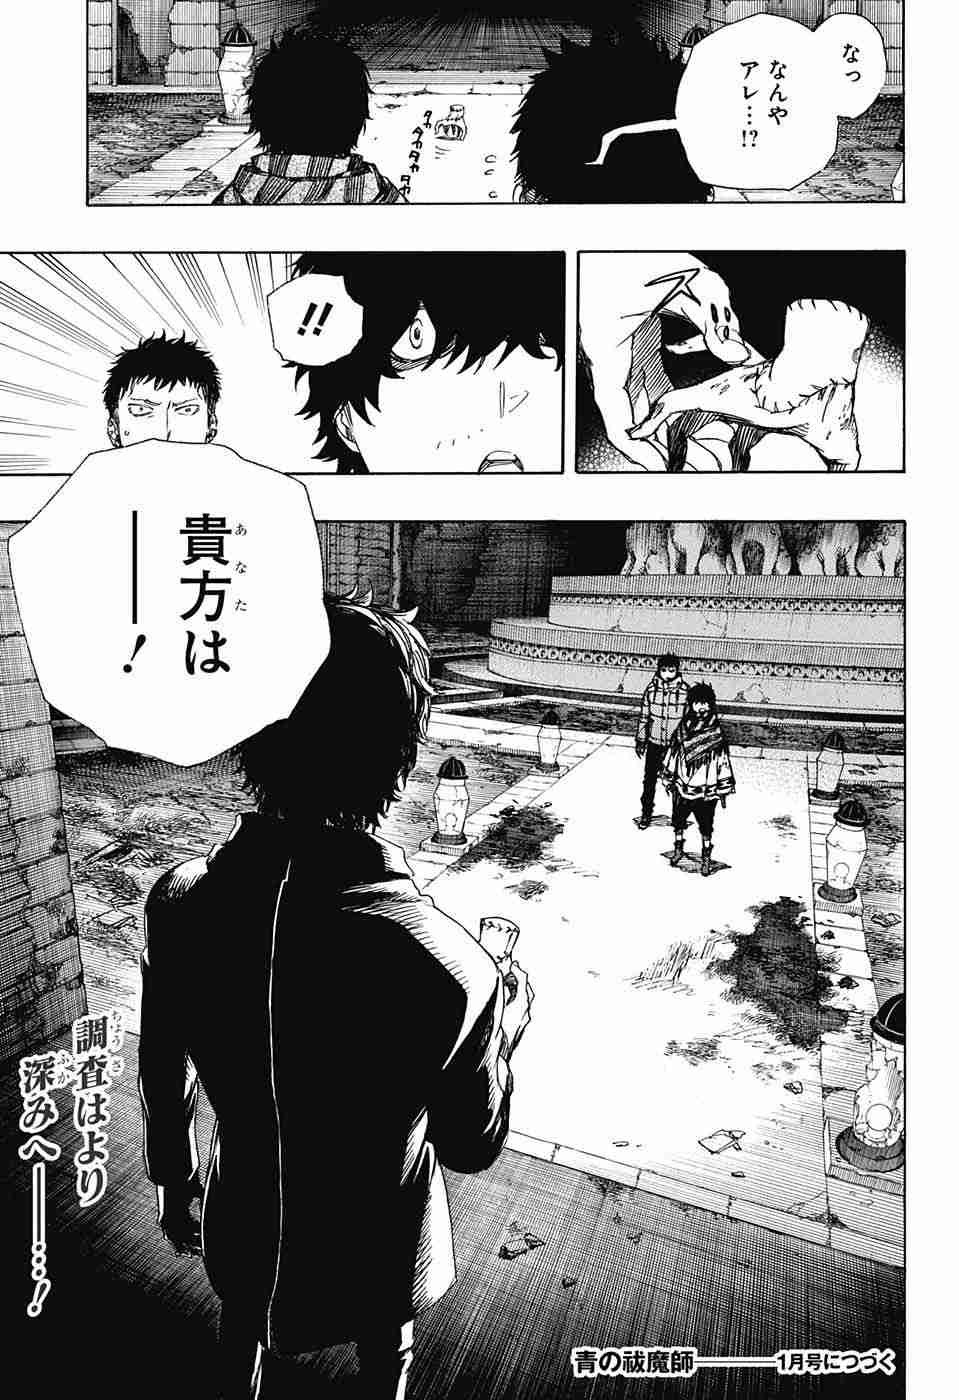 Ao no Exorcist - Chapter 84 - Page 35